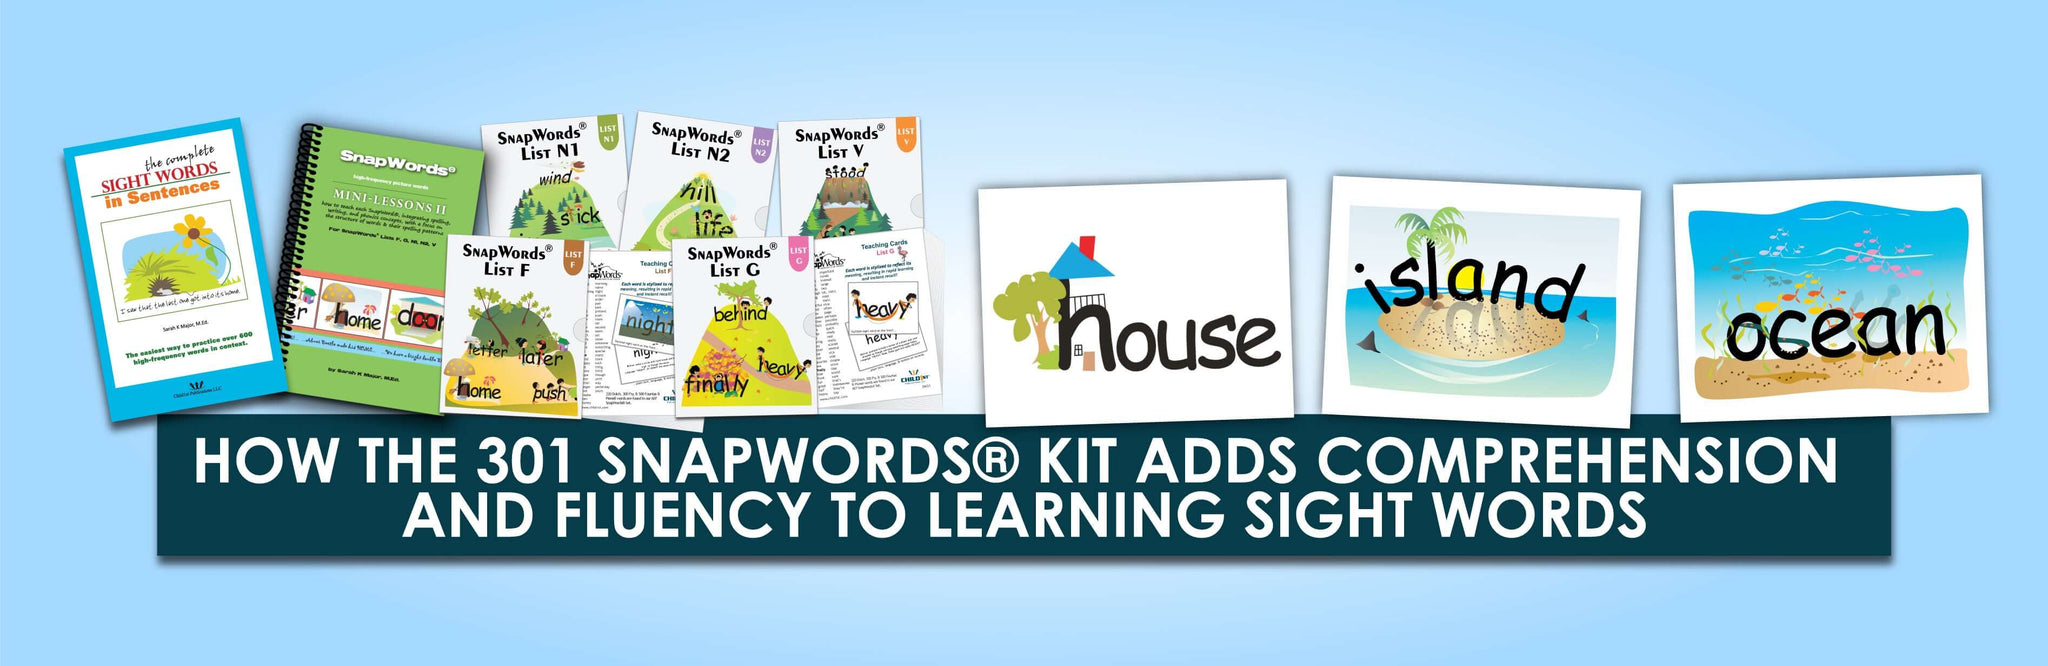 How the 301 SnapWords® Kit Adds Comprehension and Fluency to Learning Sight Words